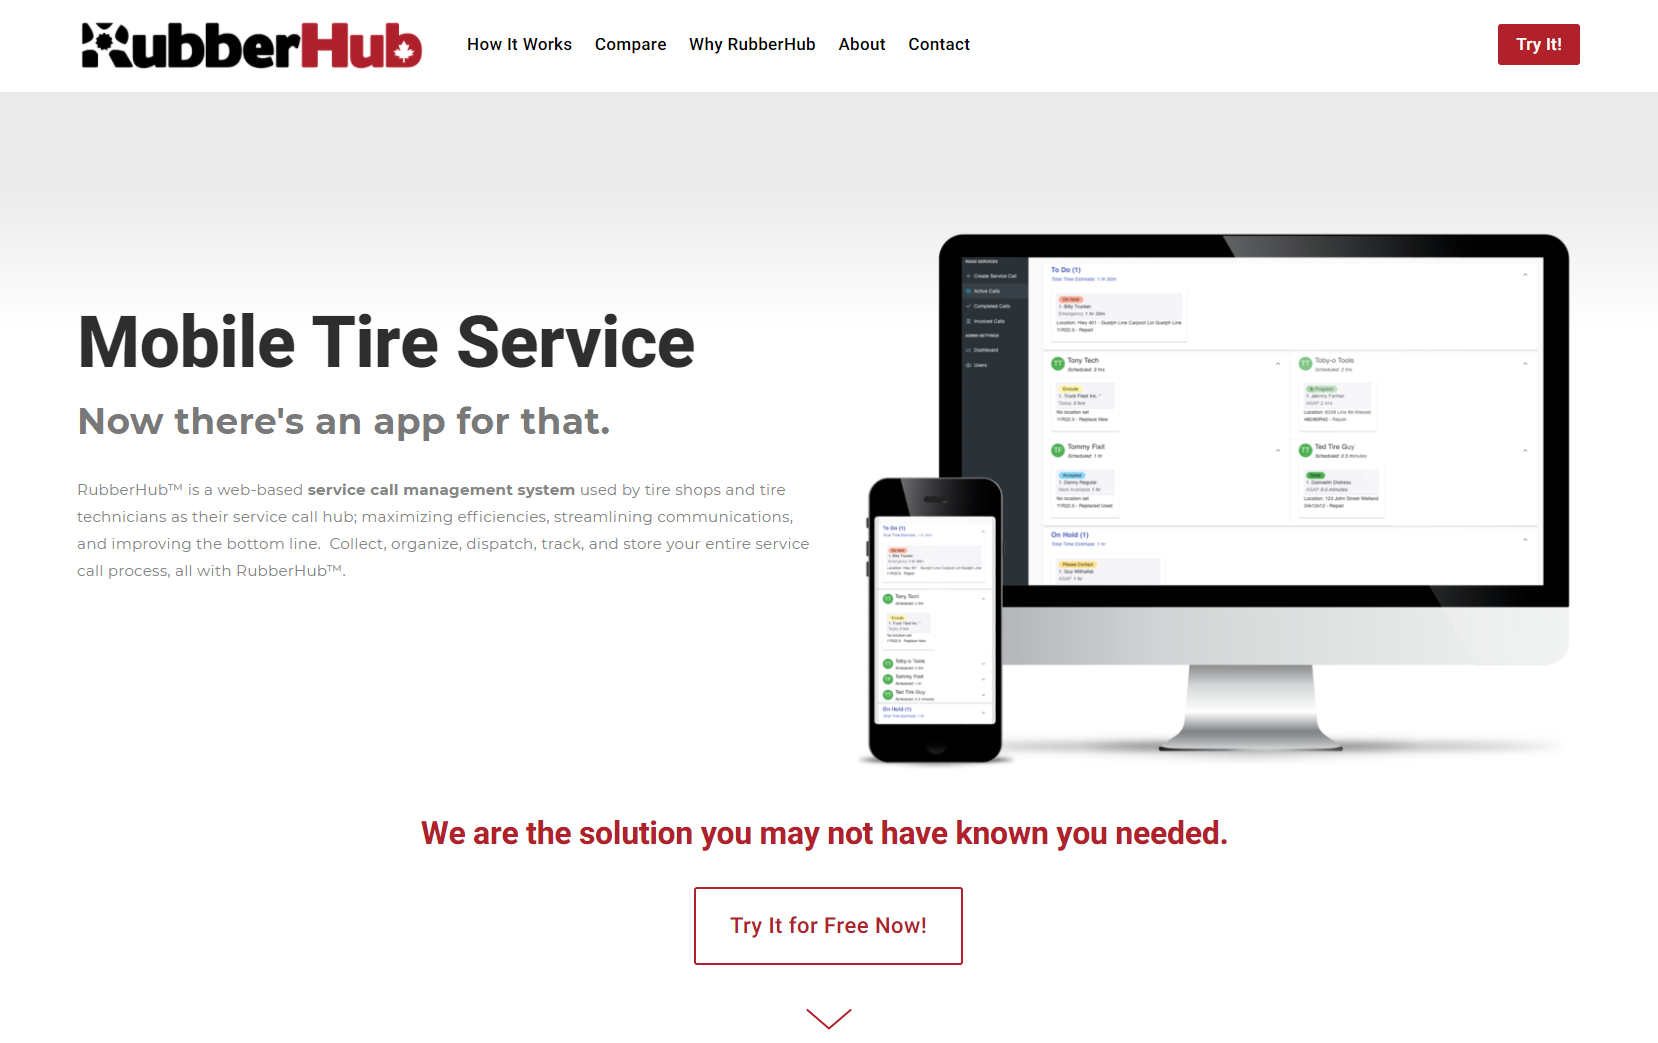 Using technology to create efficiencies in mobile tyre service